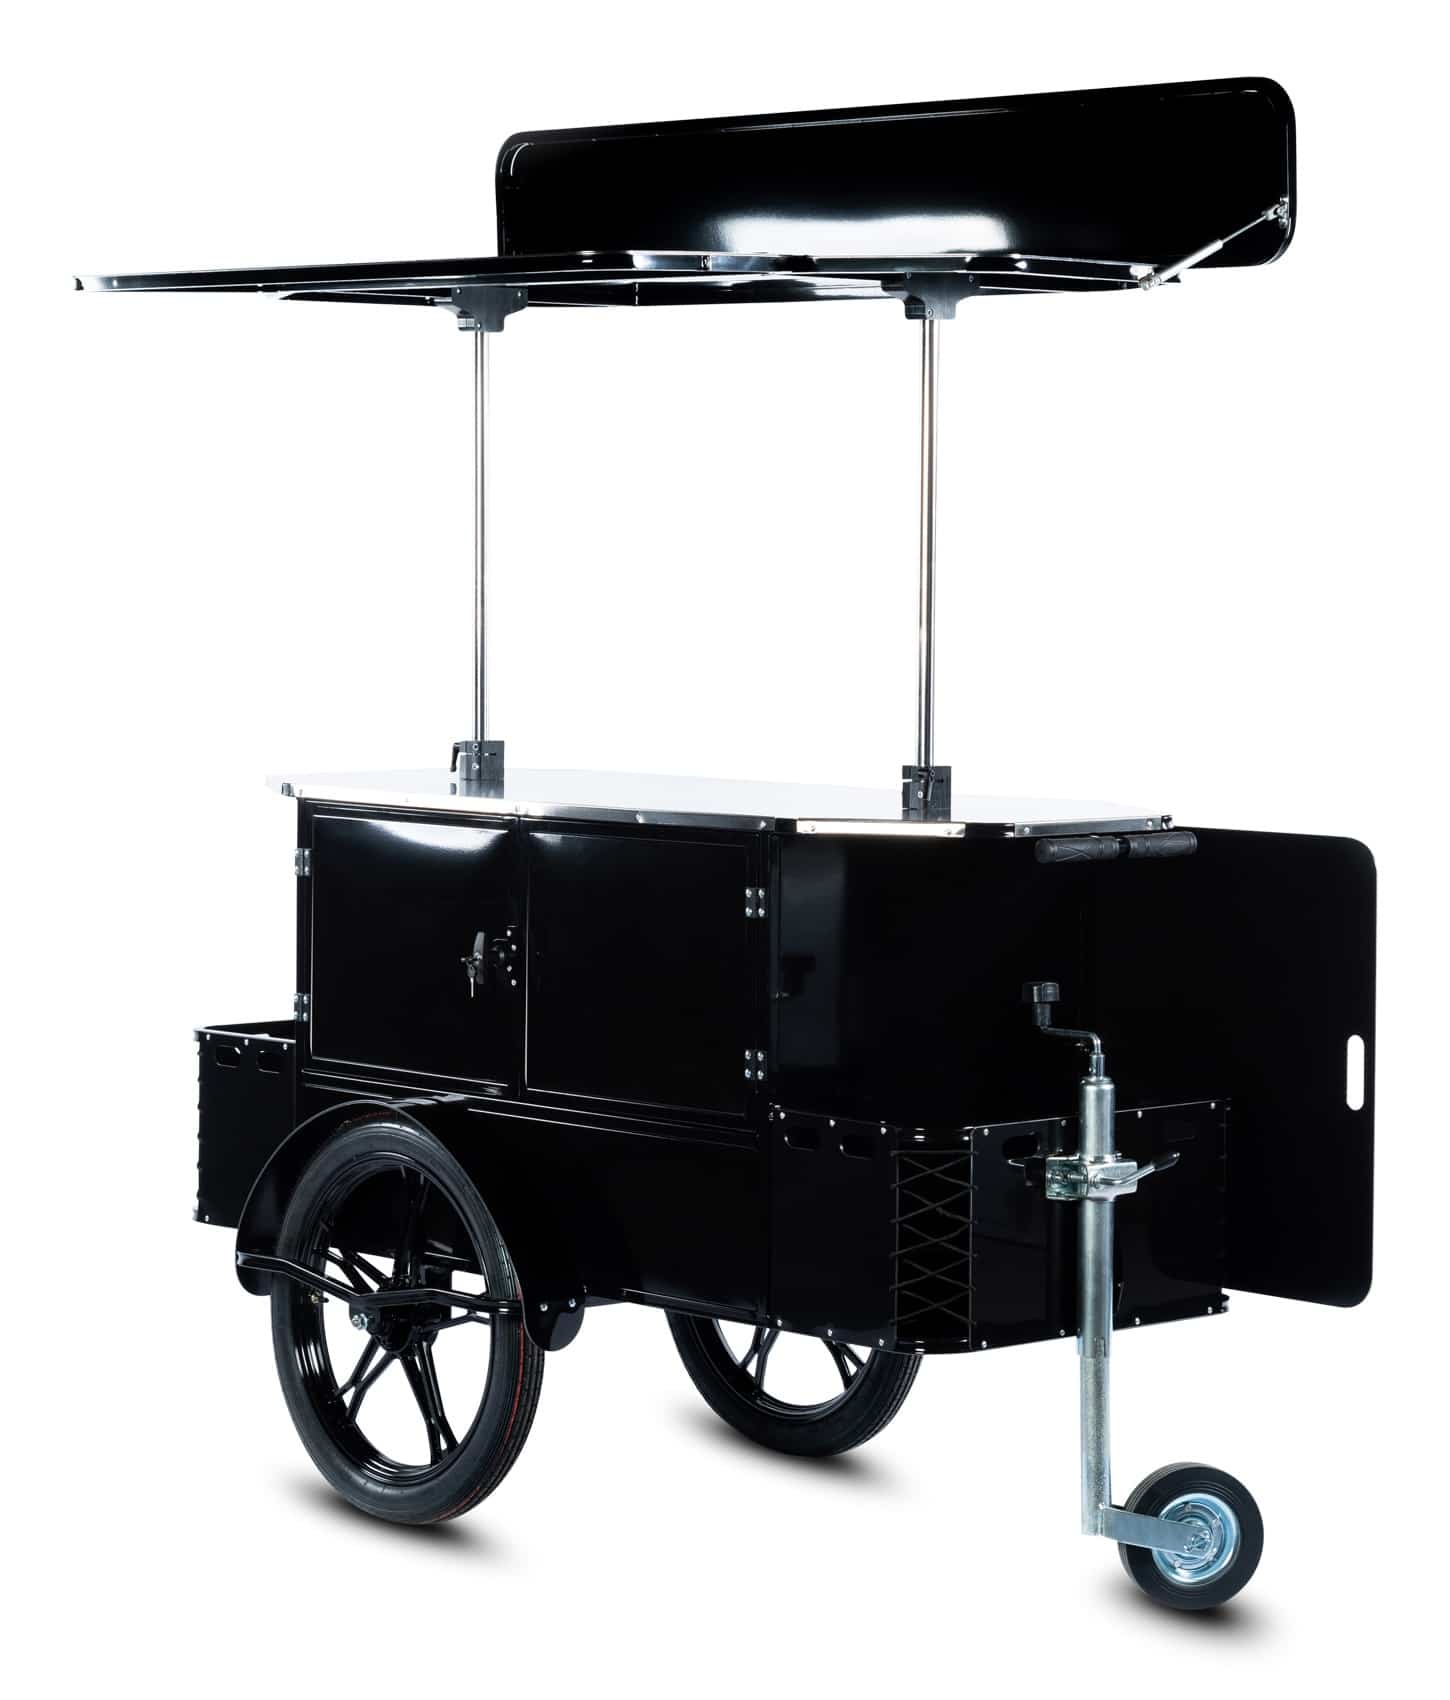 Triporteur stand mobile